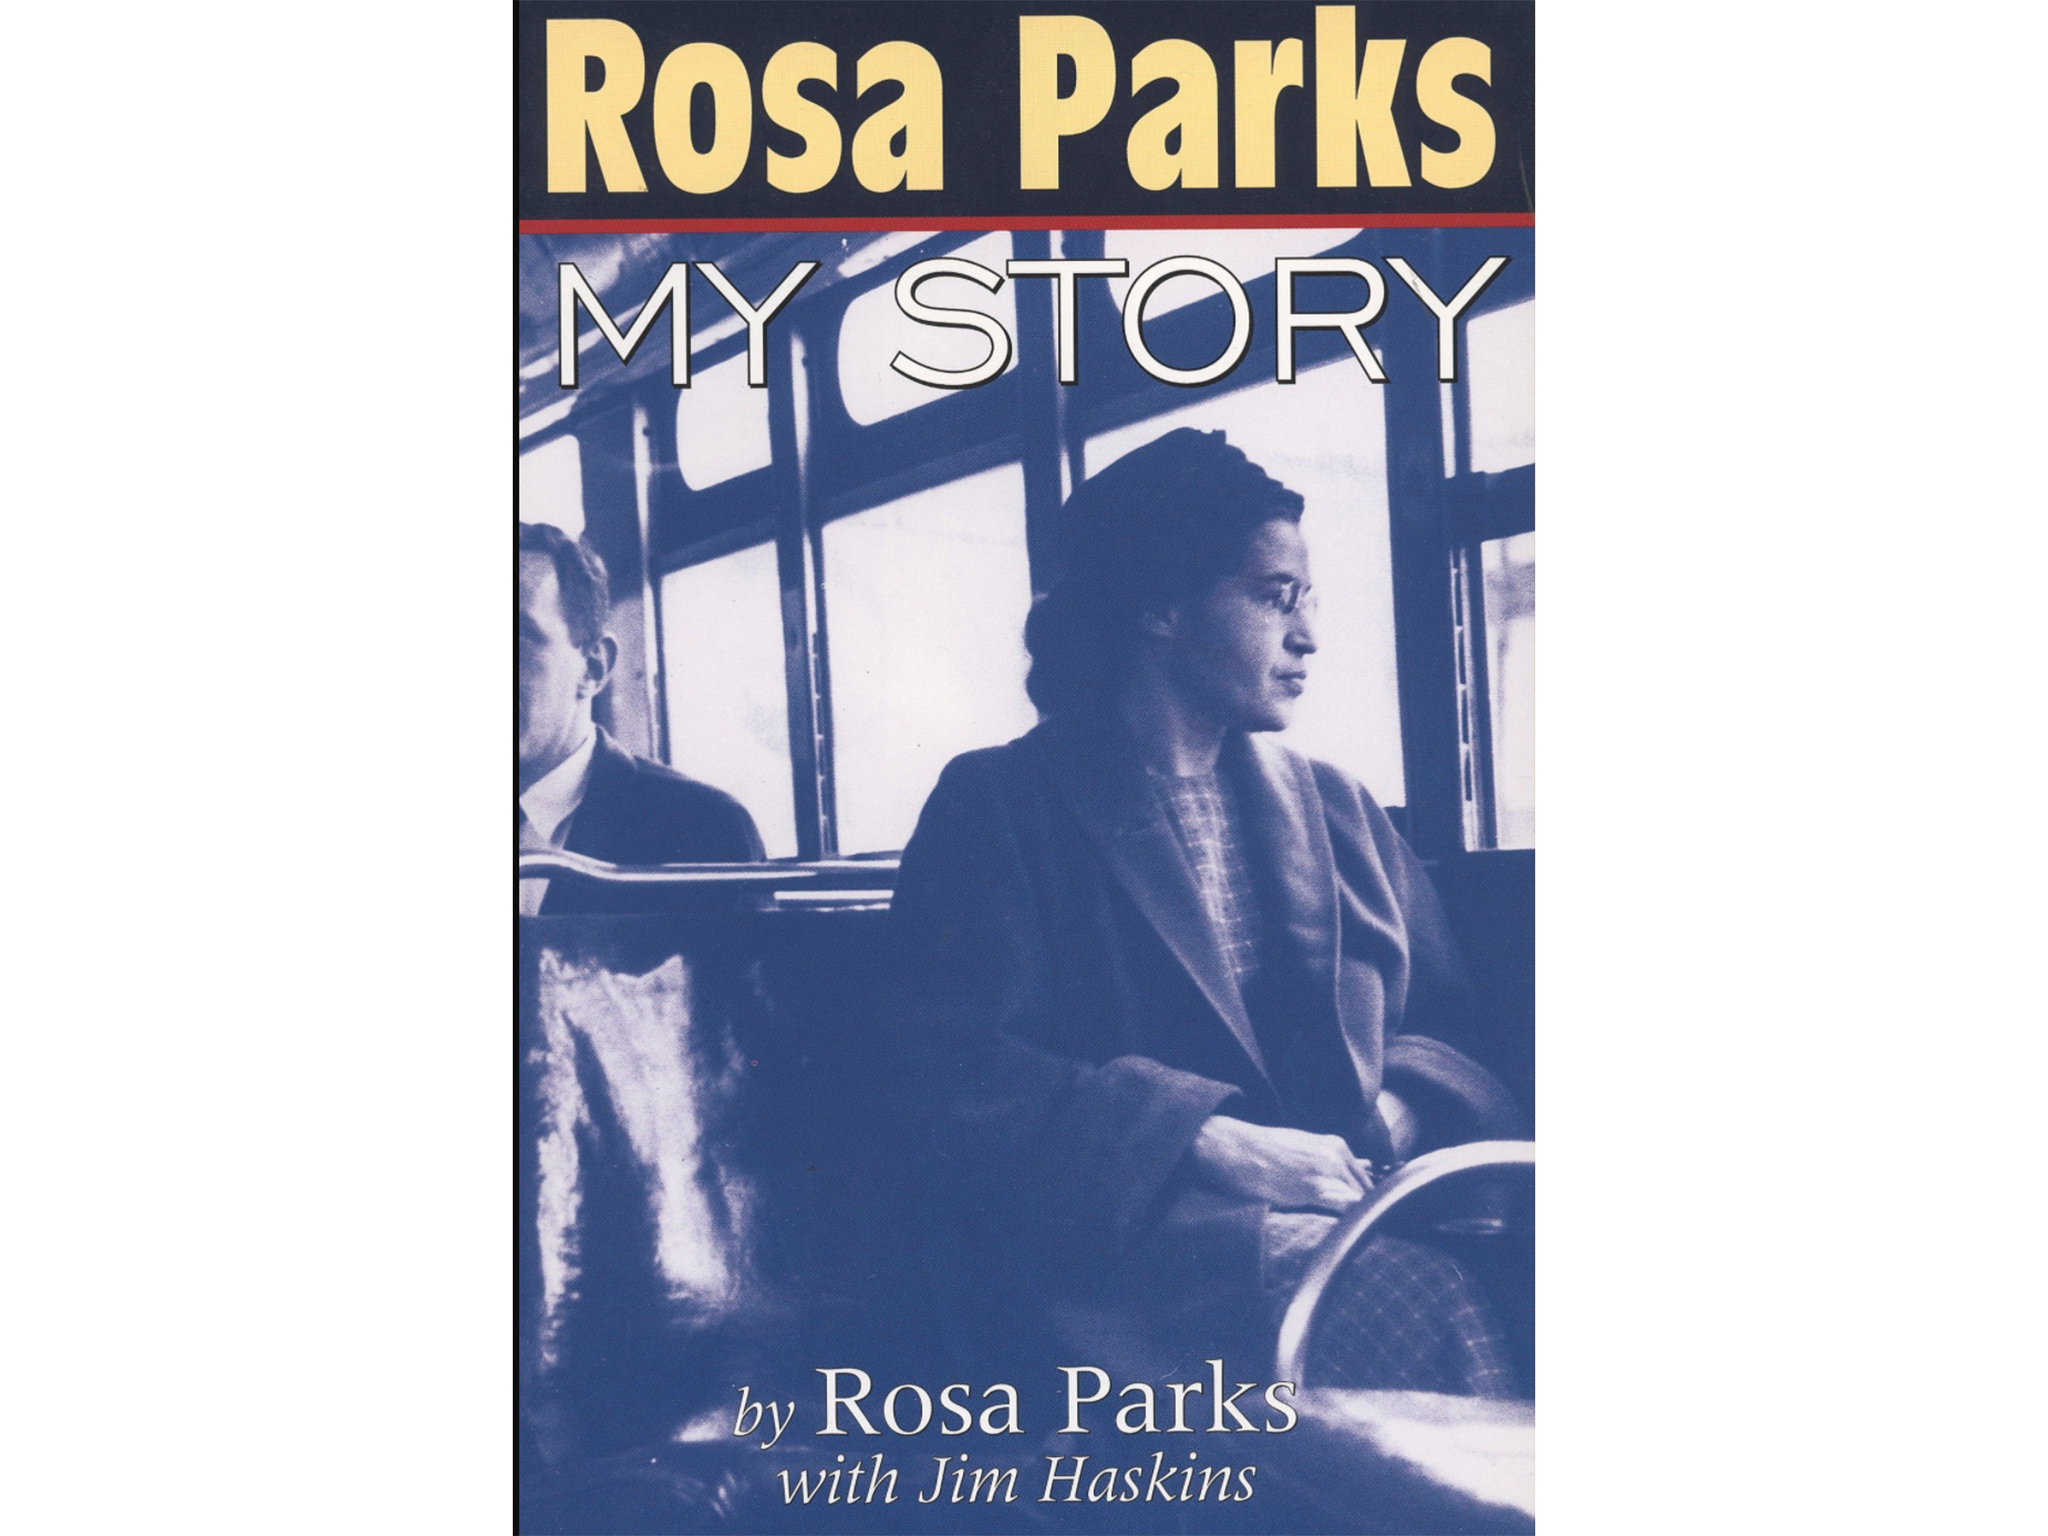 ‘Rosa Parks: My Story’ by Jim Haskins and Rosa Parks